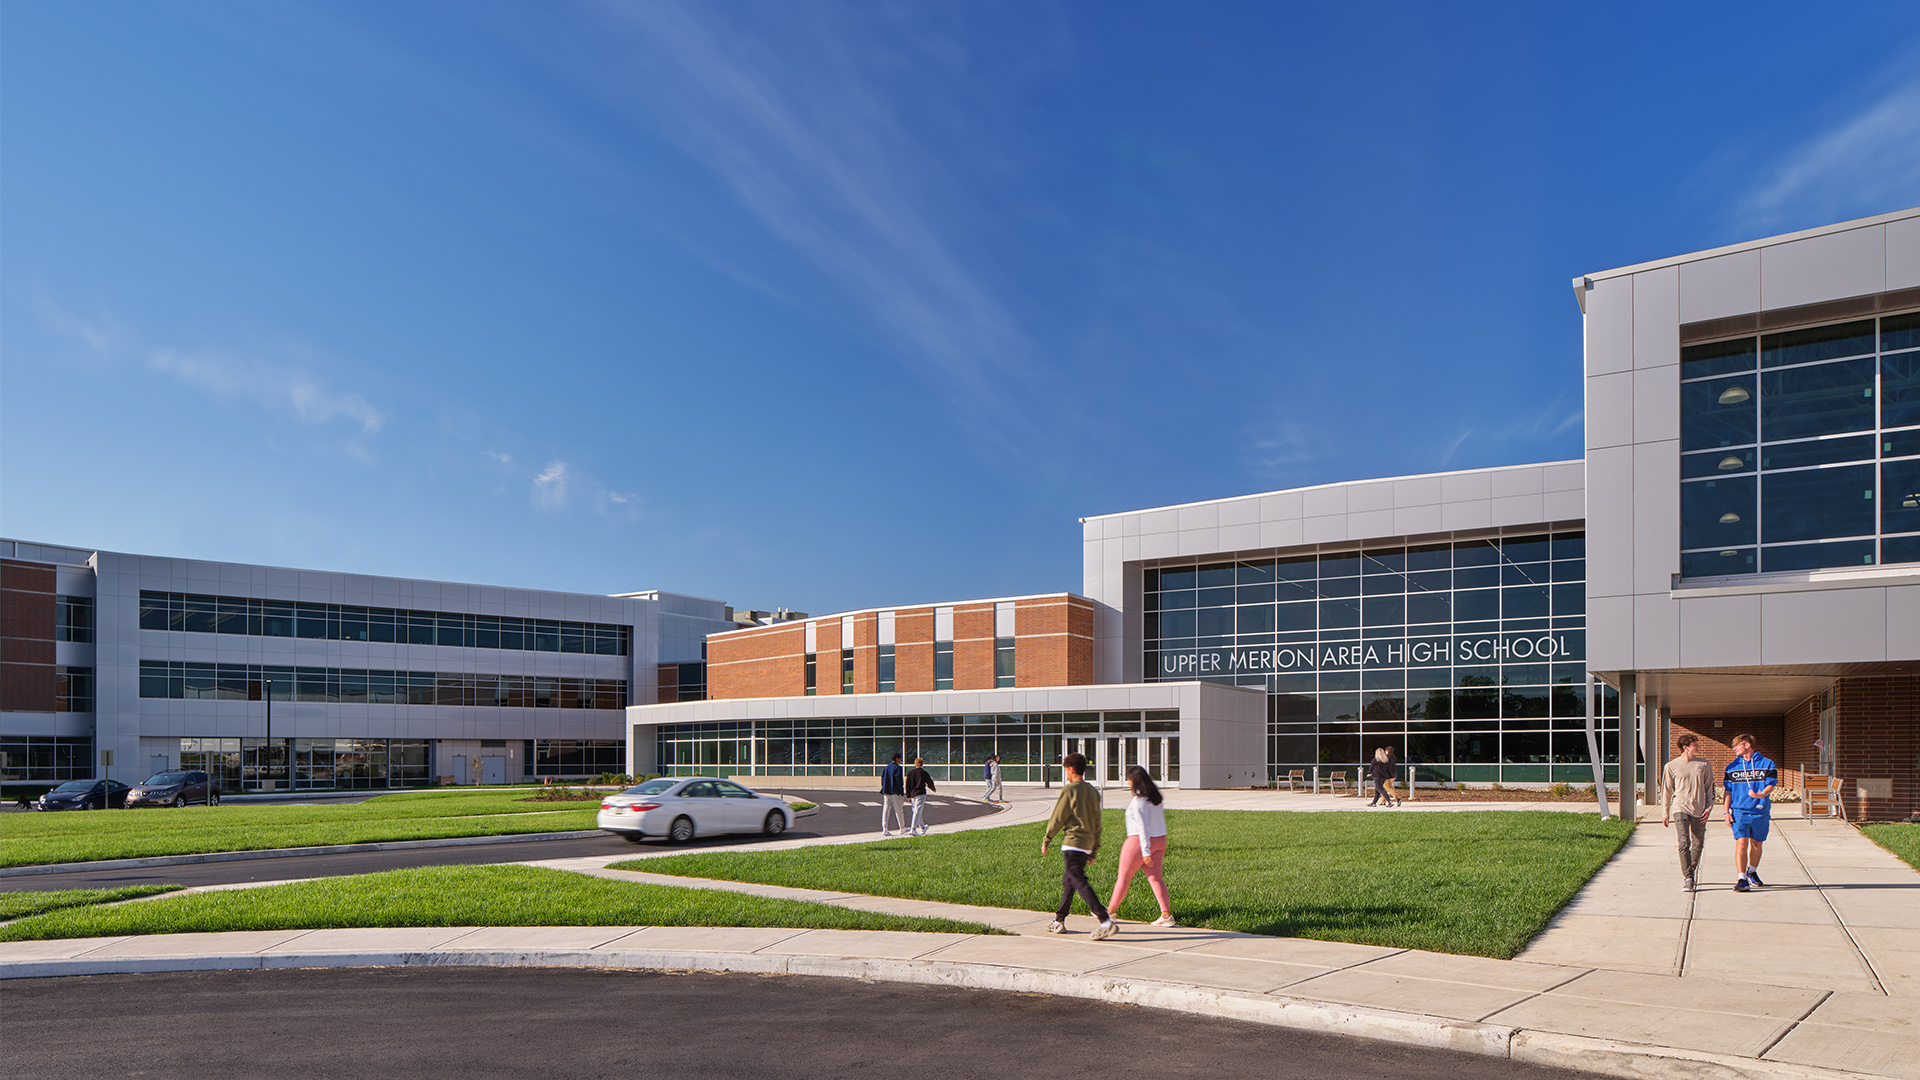 7_SCHRADERGROUP_Learning-By-Design-Fall-2022-Outstanding Project-Upper-Merion-Area-High-School